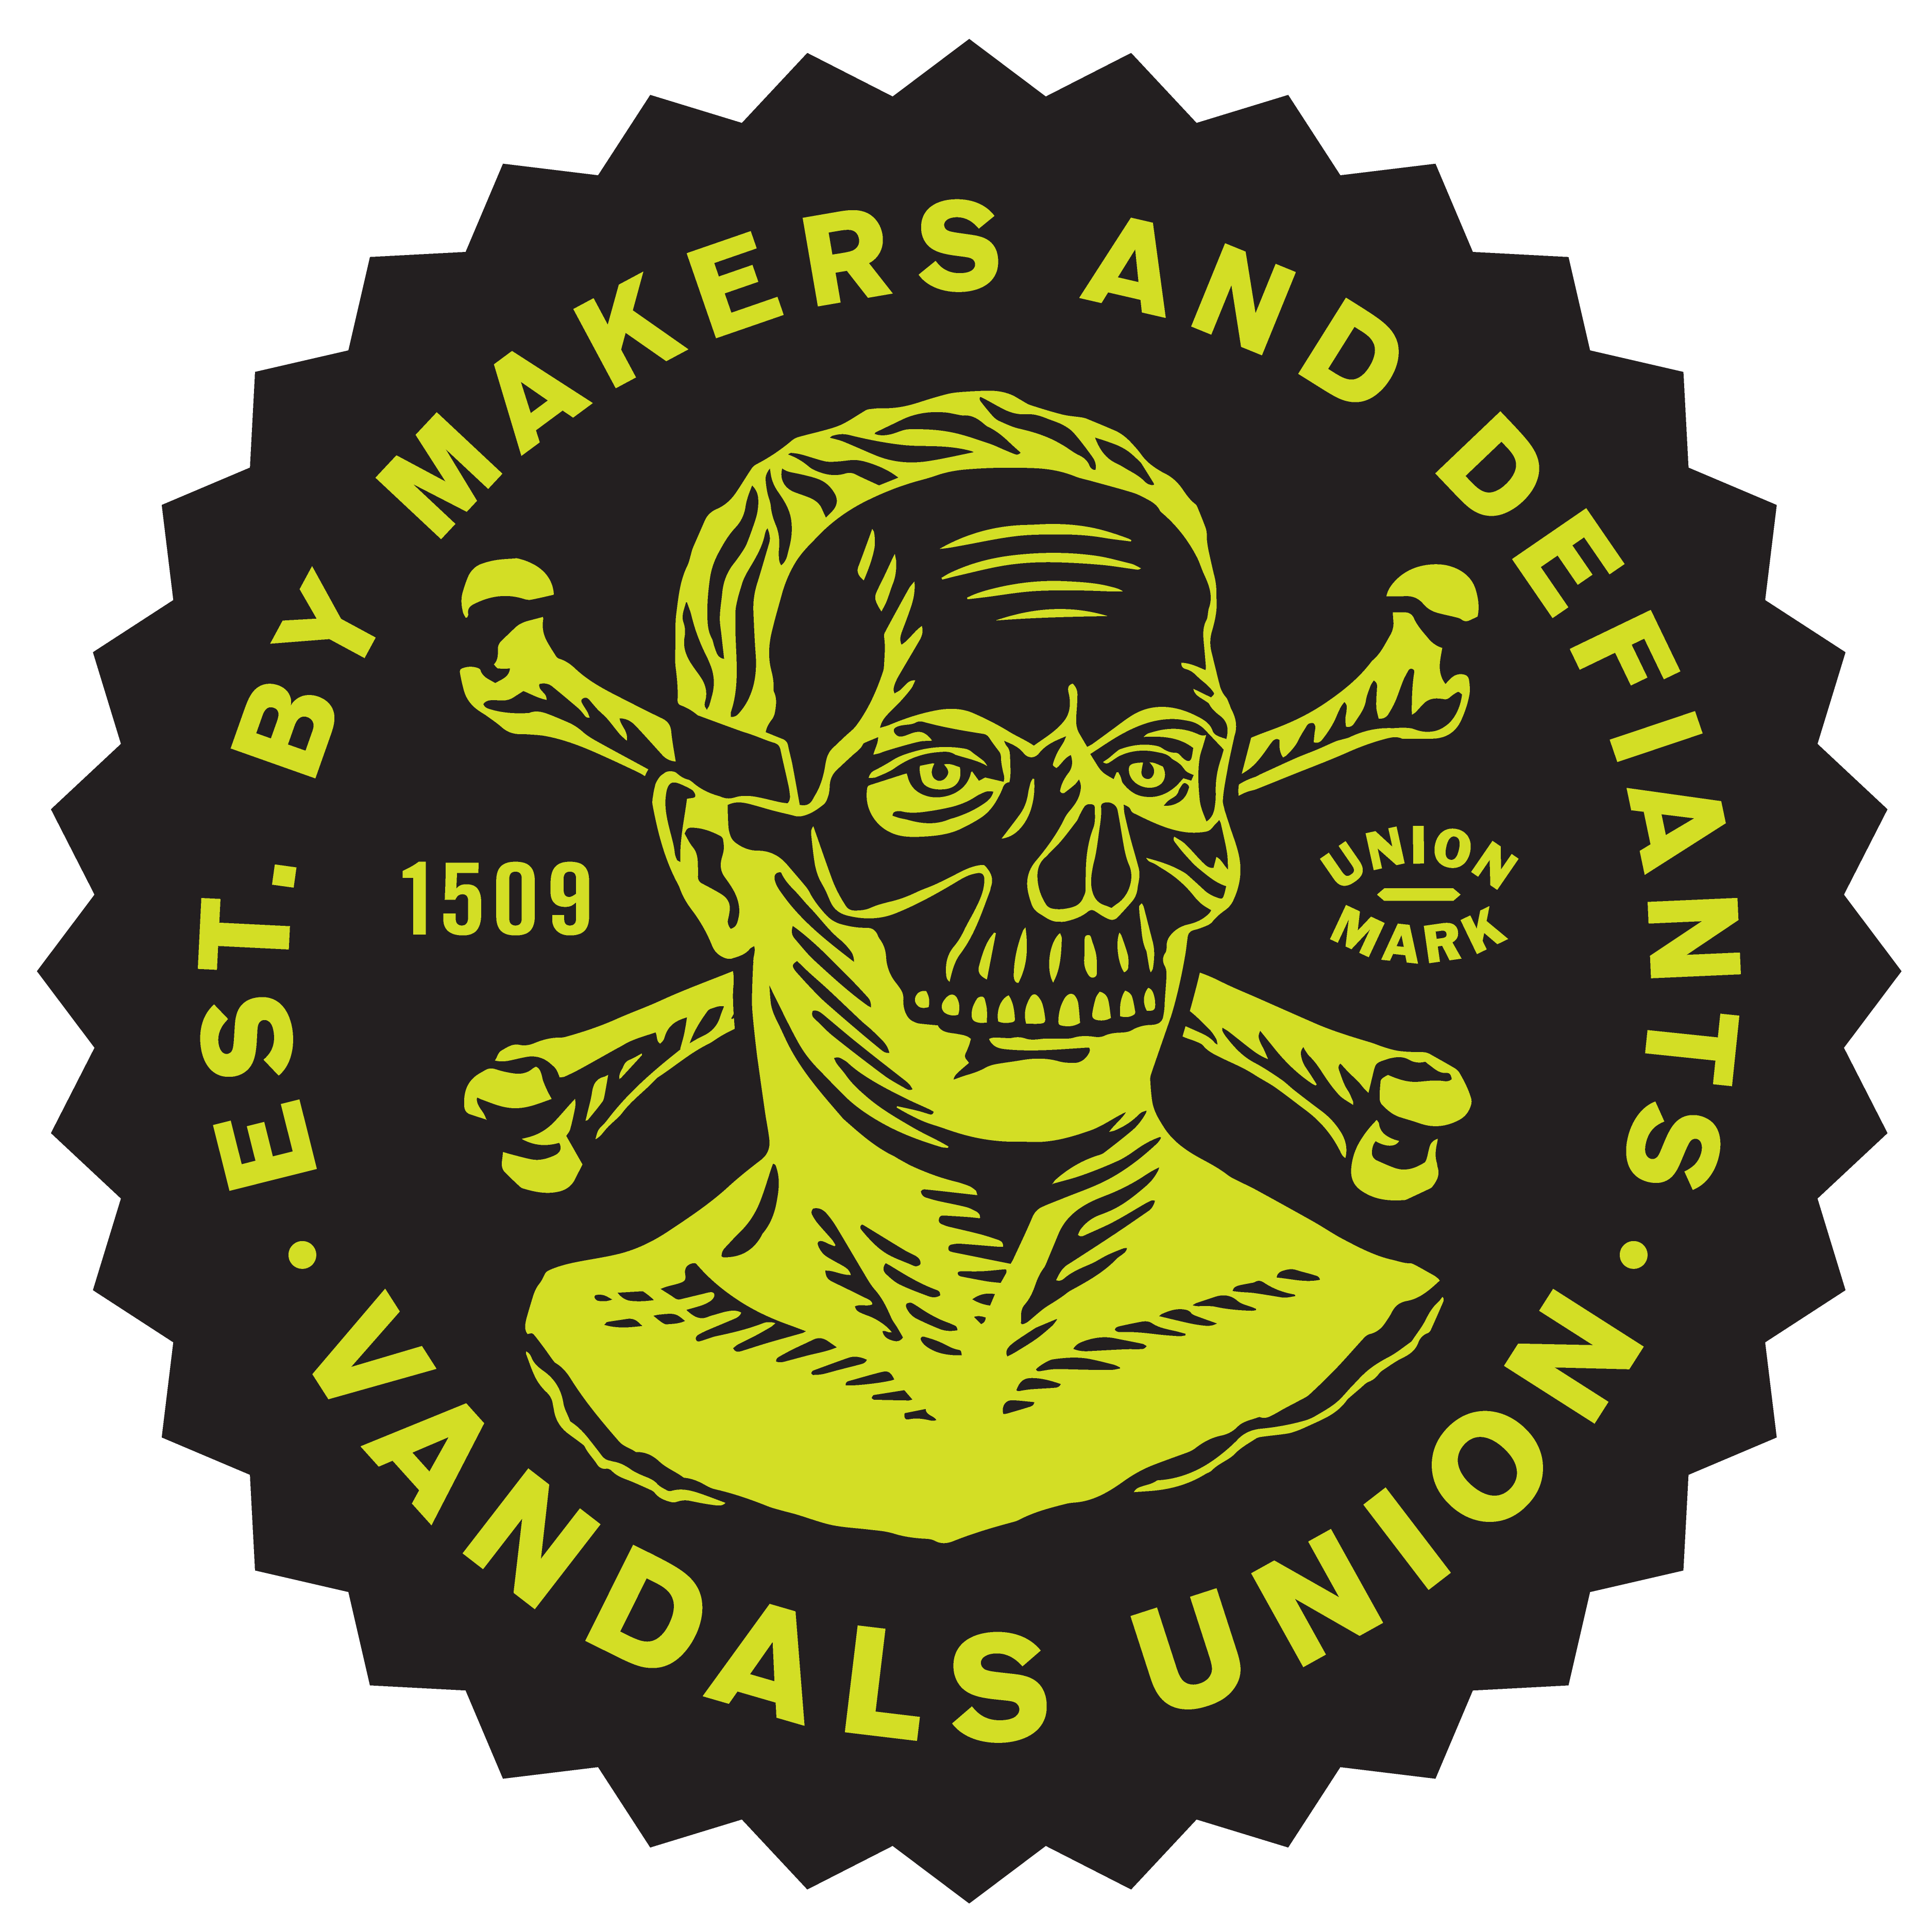 Vandals Union  logo design by logo designer Chad Michael Studio for your inspiration and for the worlds largest logo competition